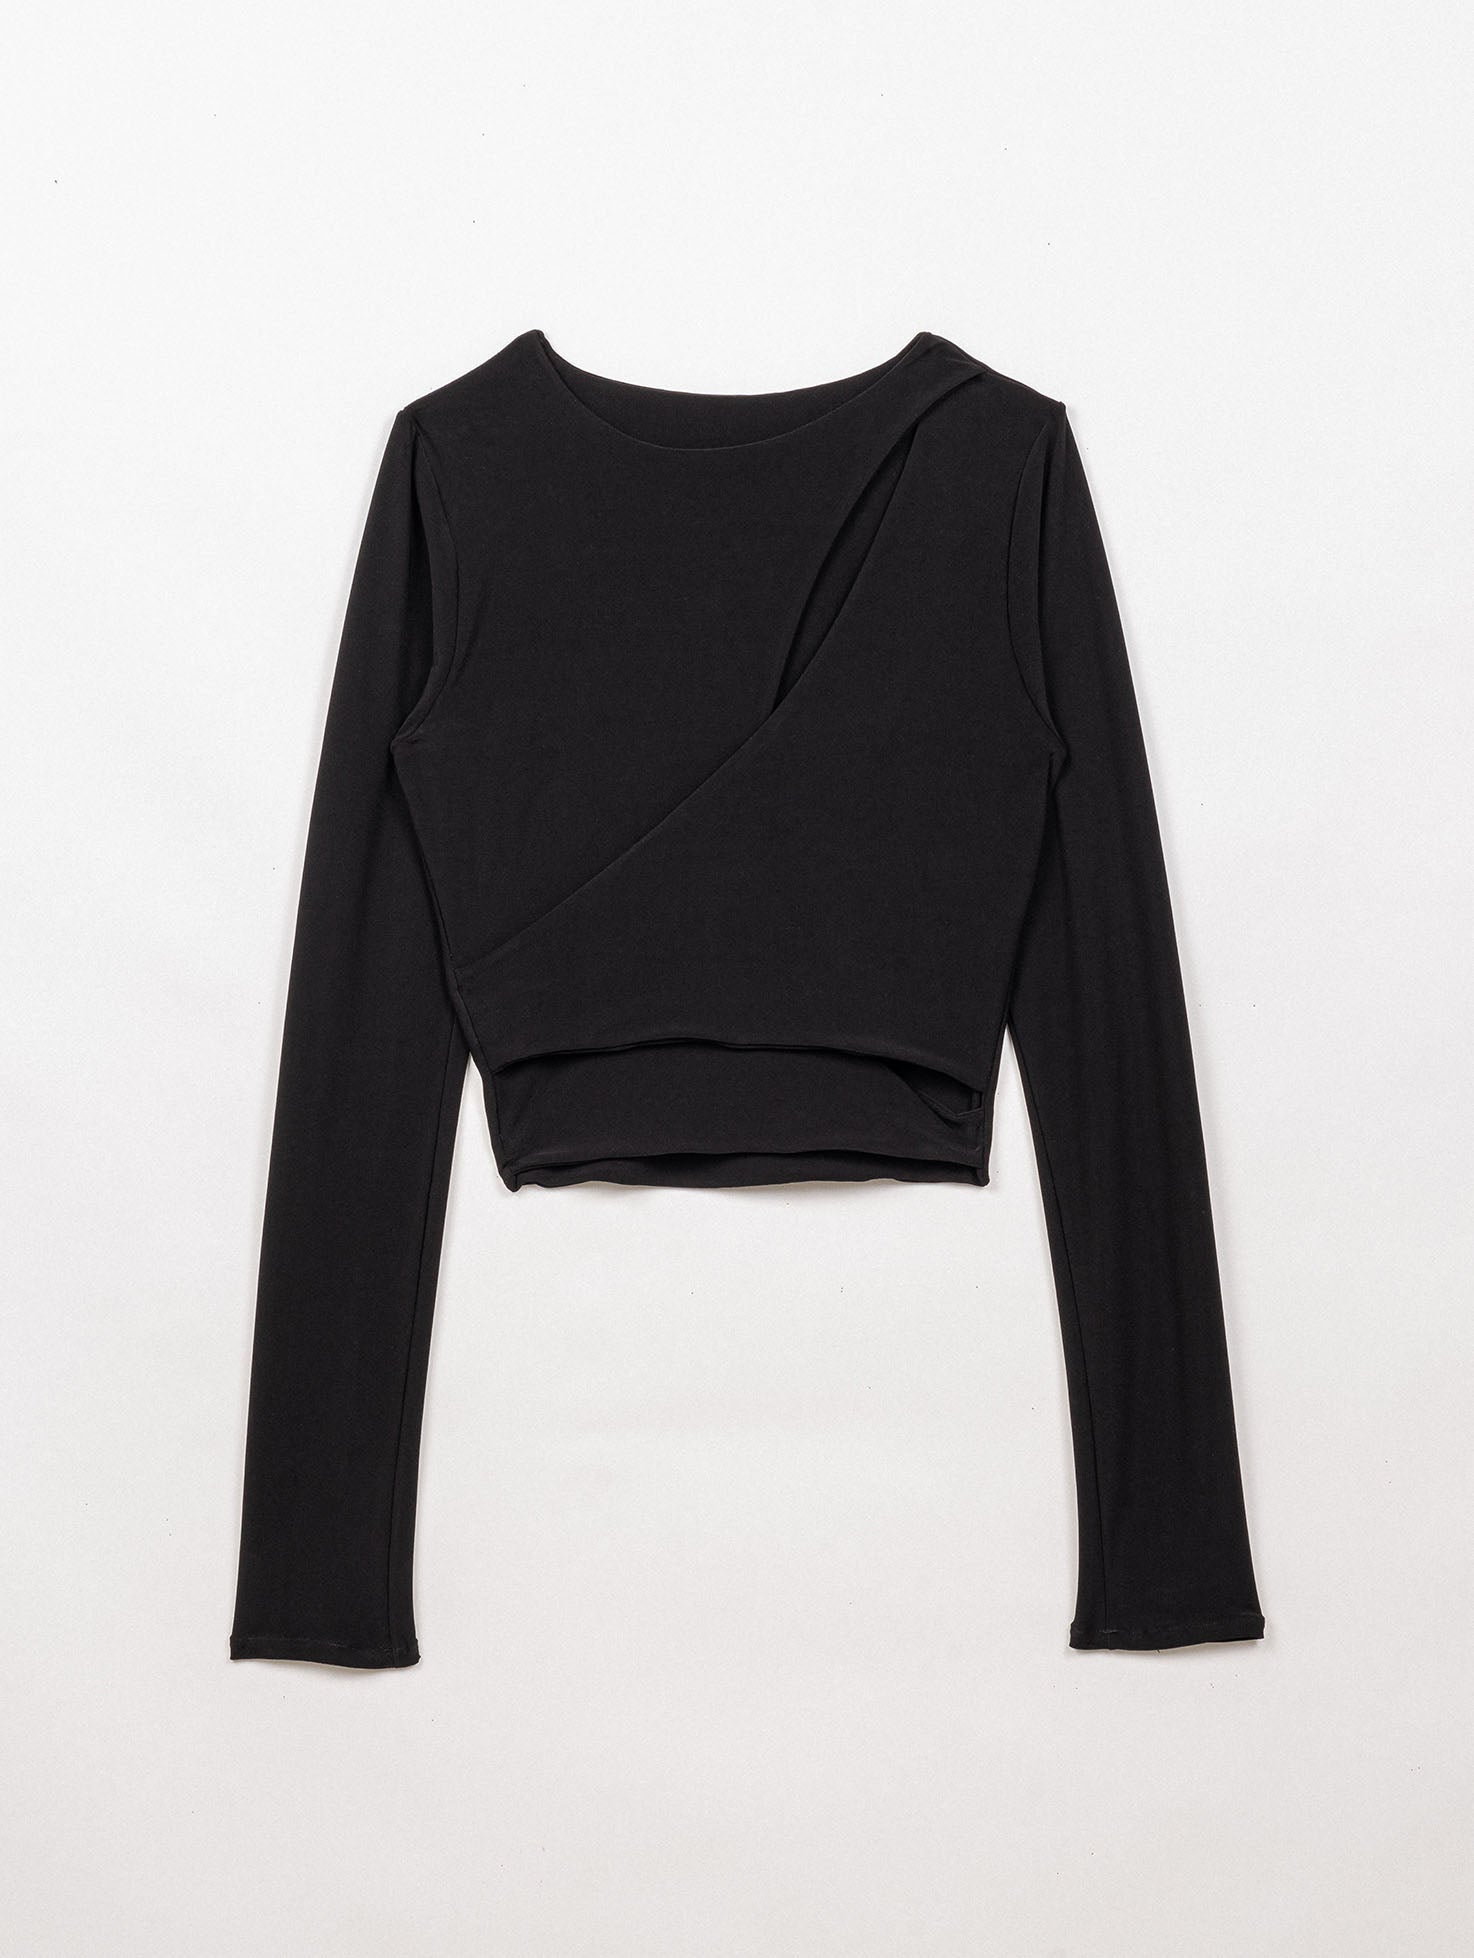 Fitted long sleeve top with cut out details at the front.